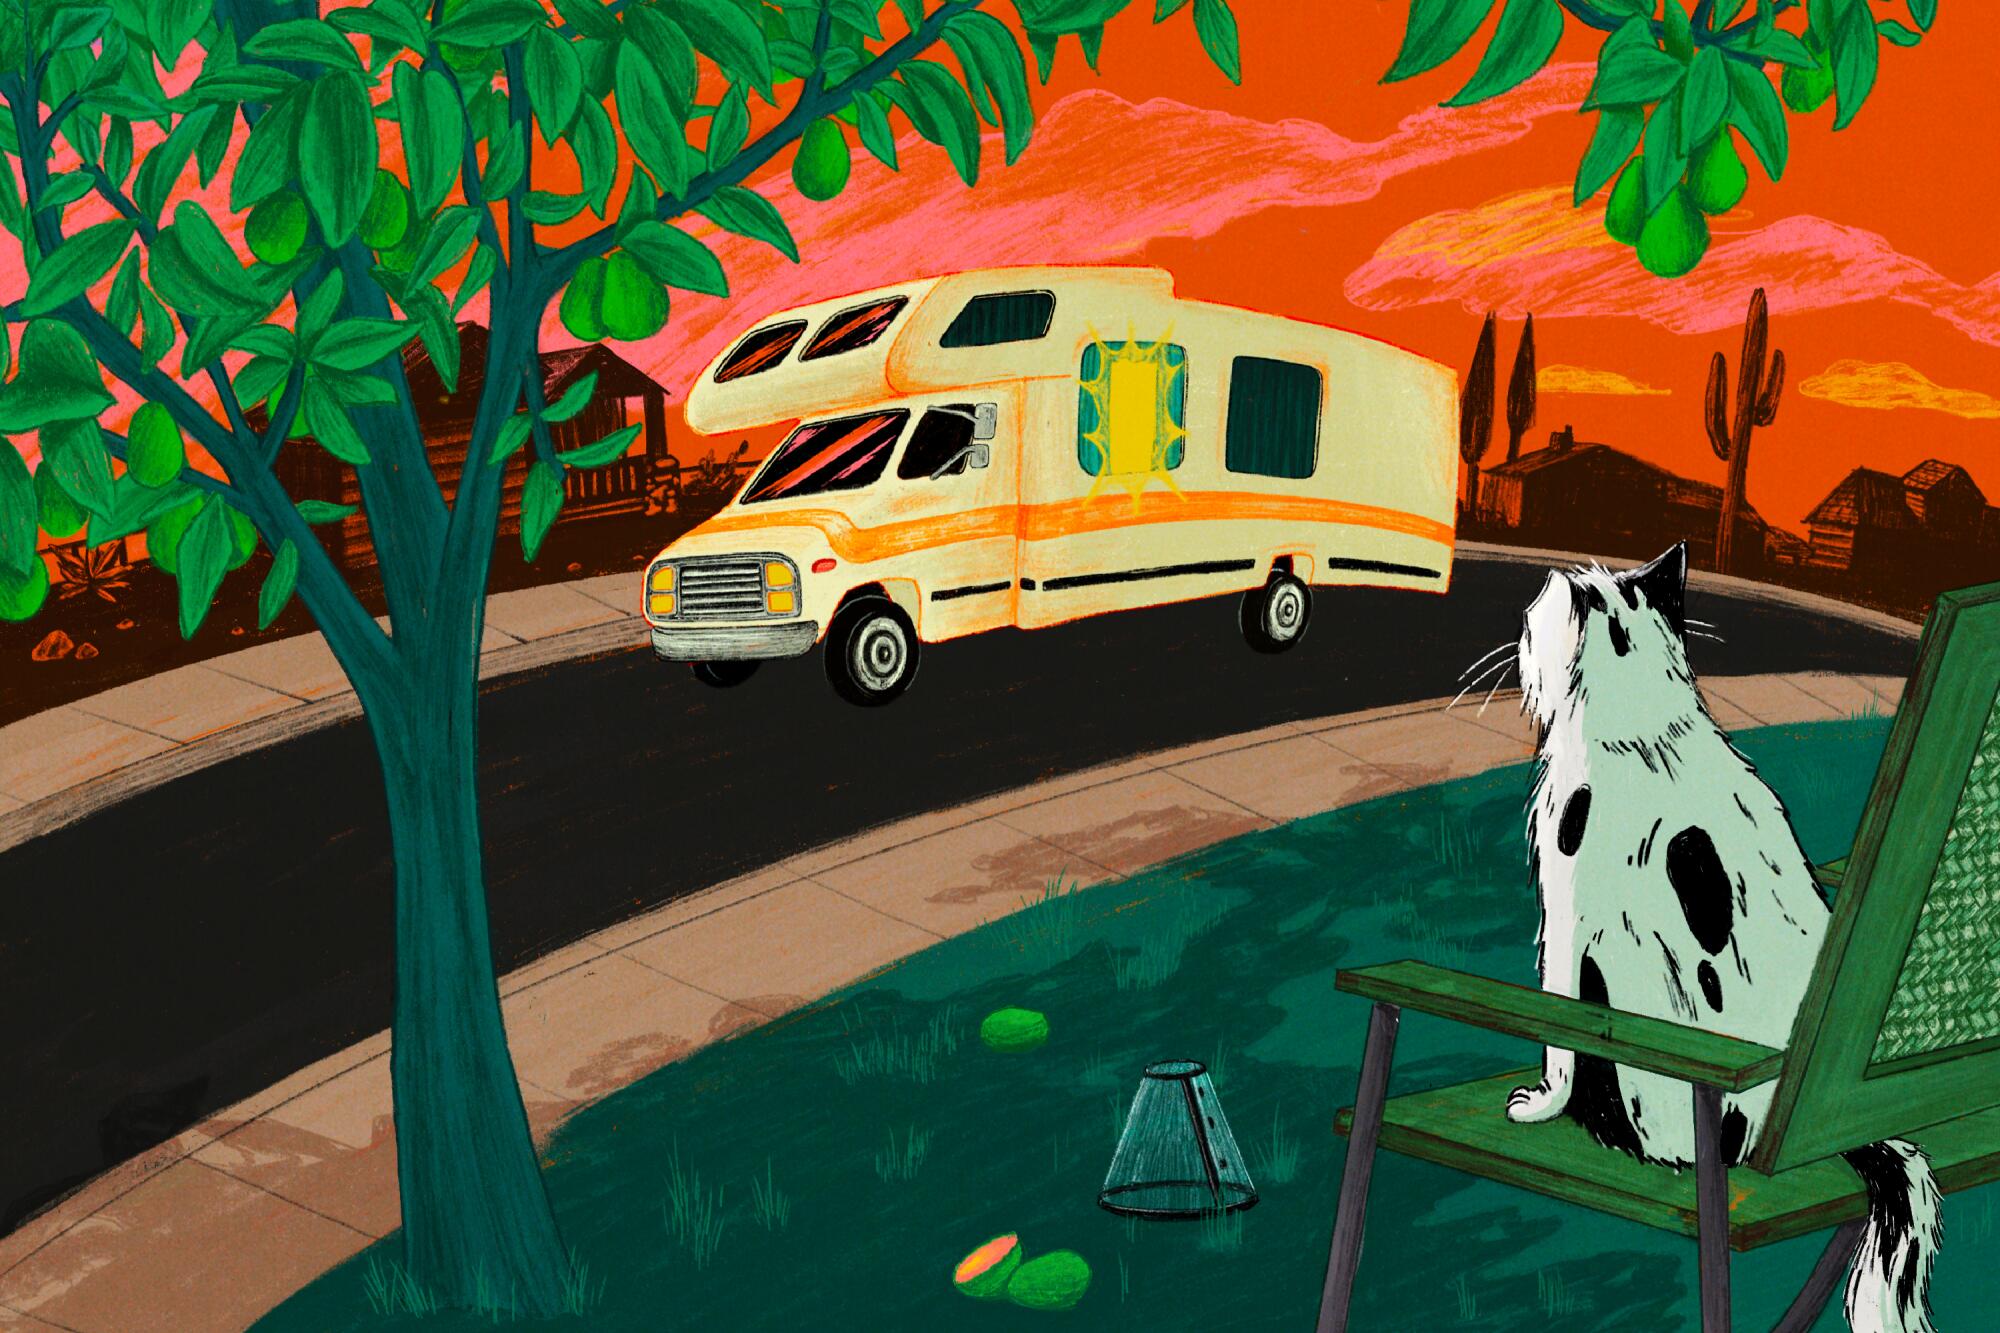 An illustration of a cat, RV, and guava tree during sunset.